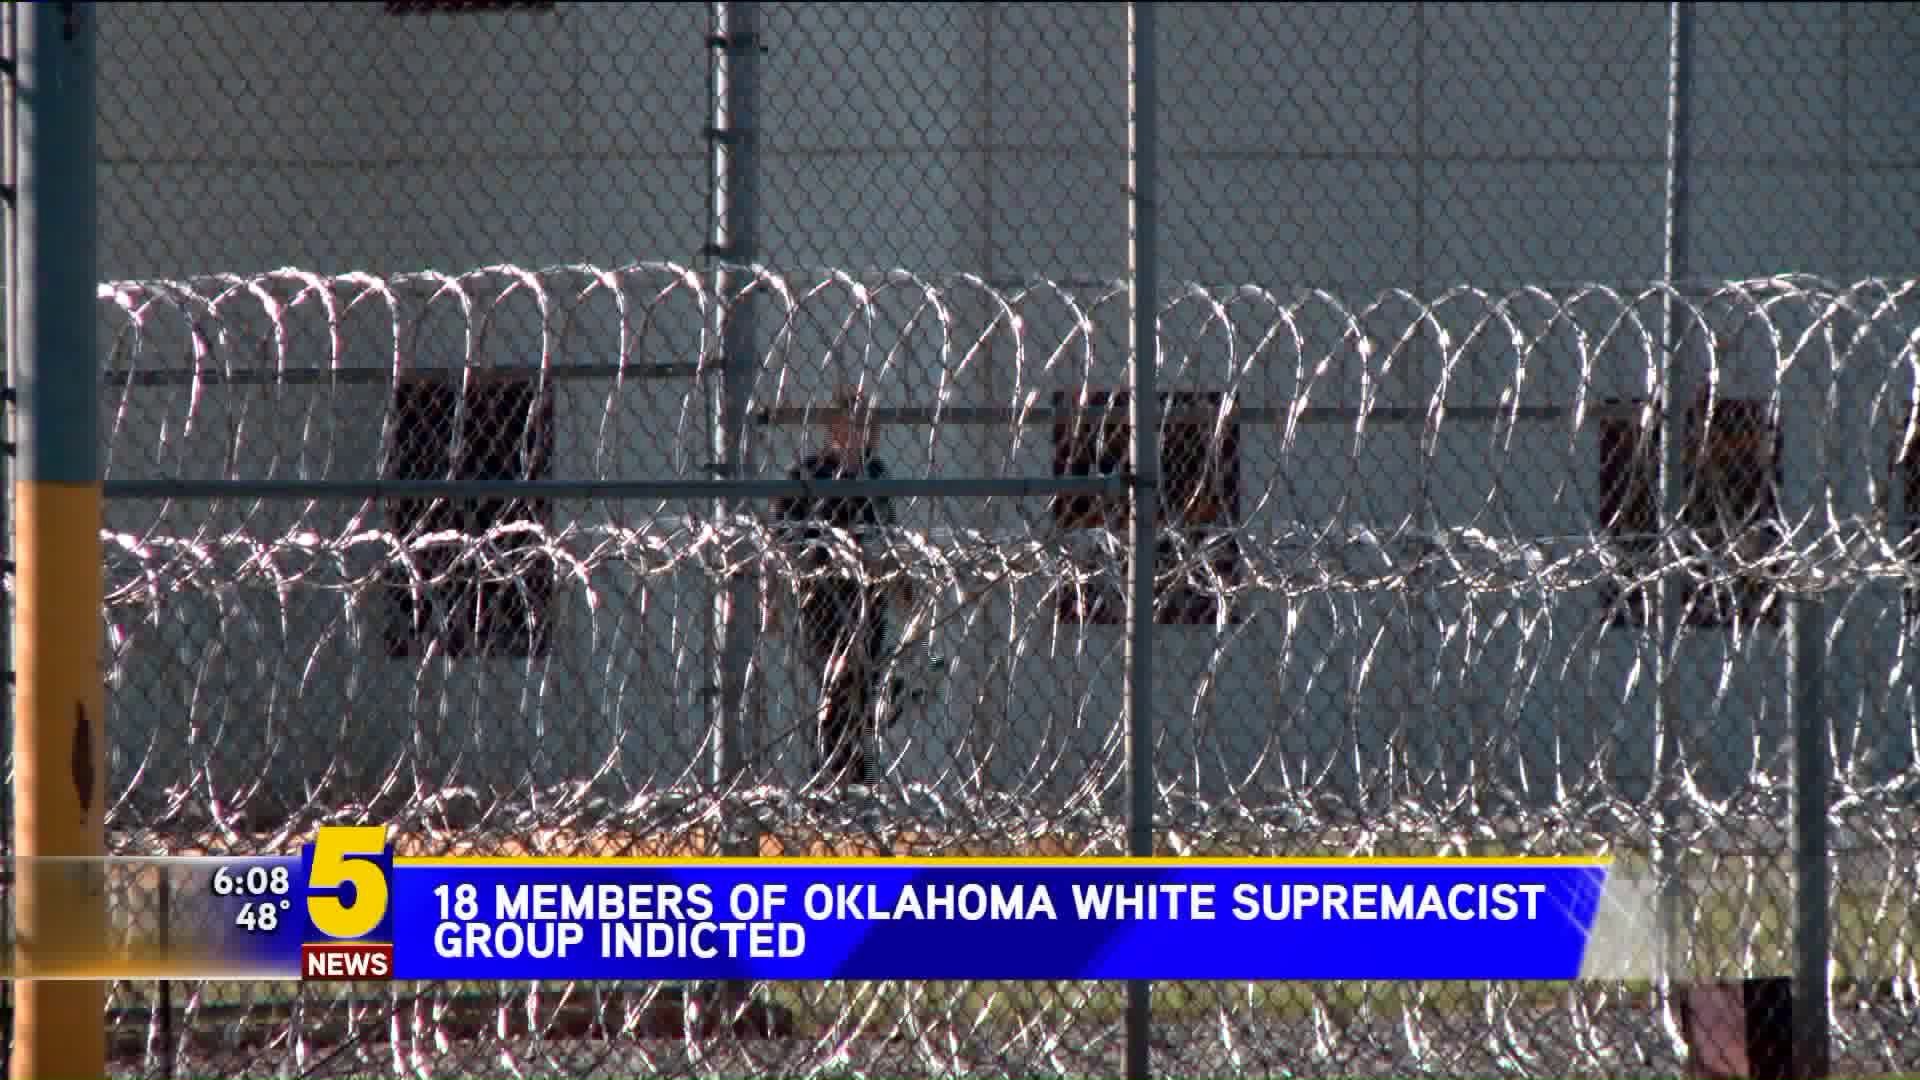 18 Members Of Oklahoma White Supremacist Prison Gang Indicted